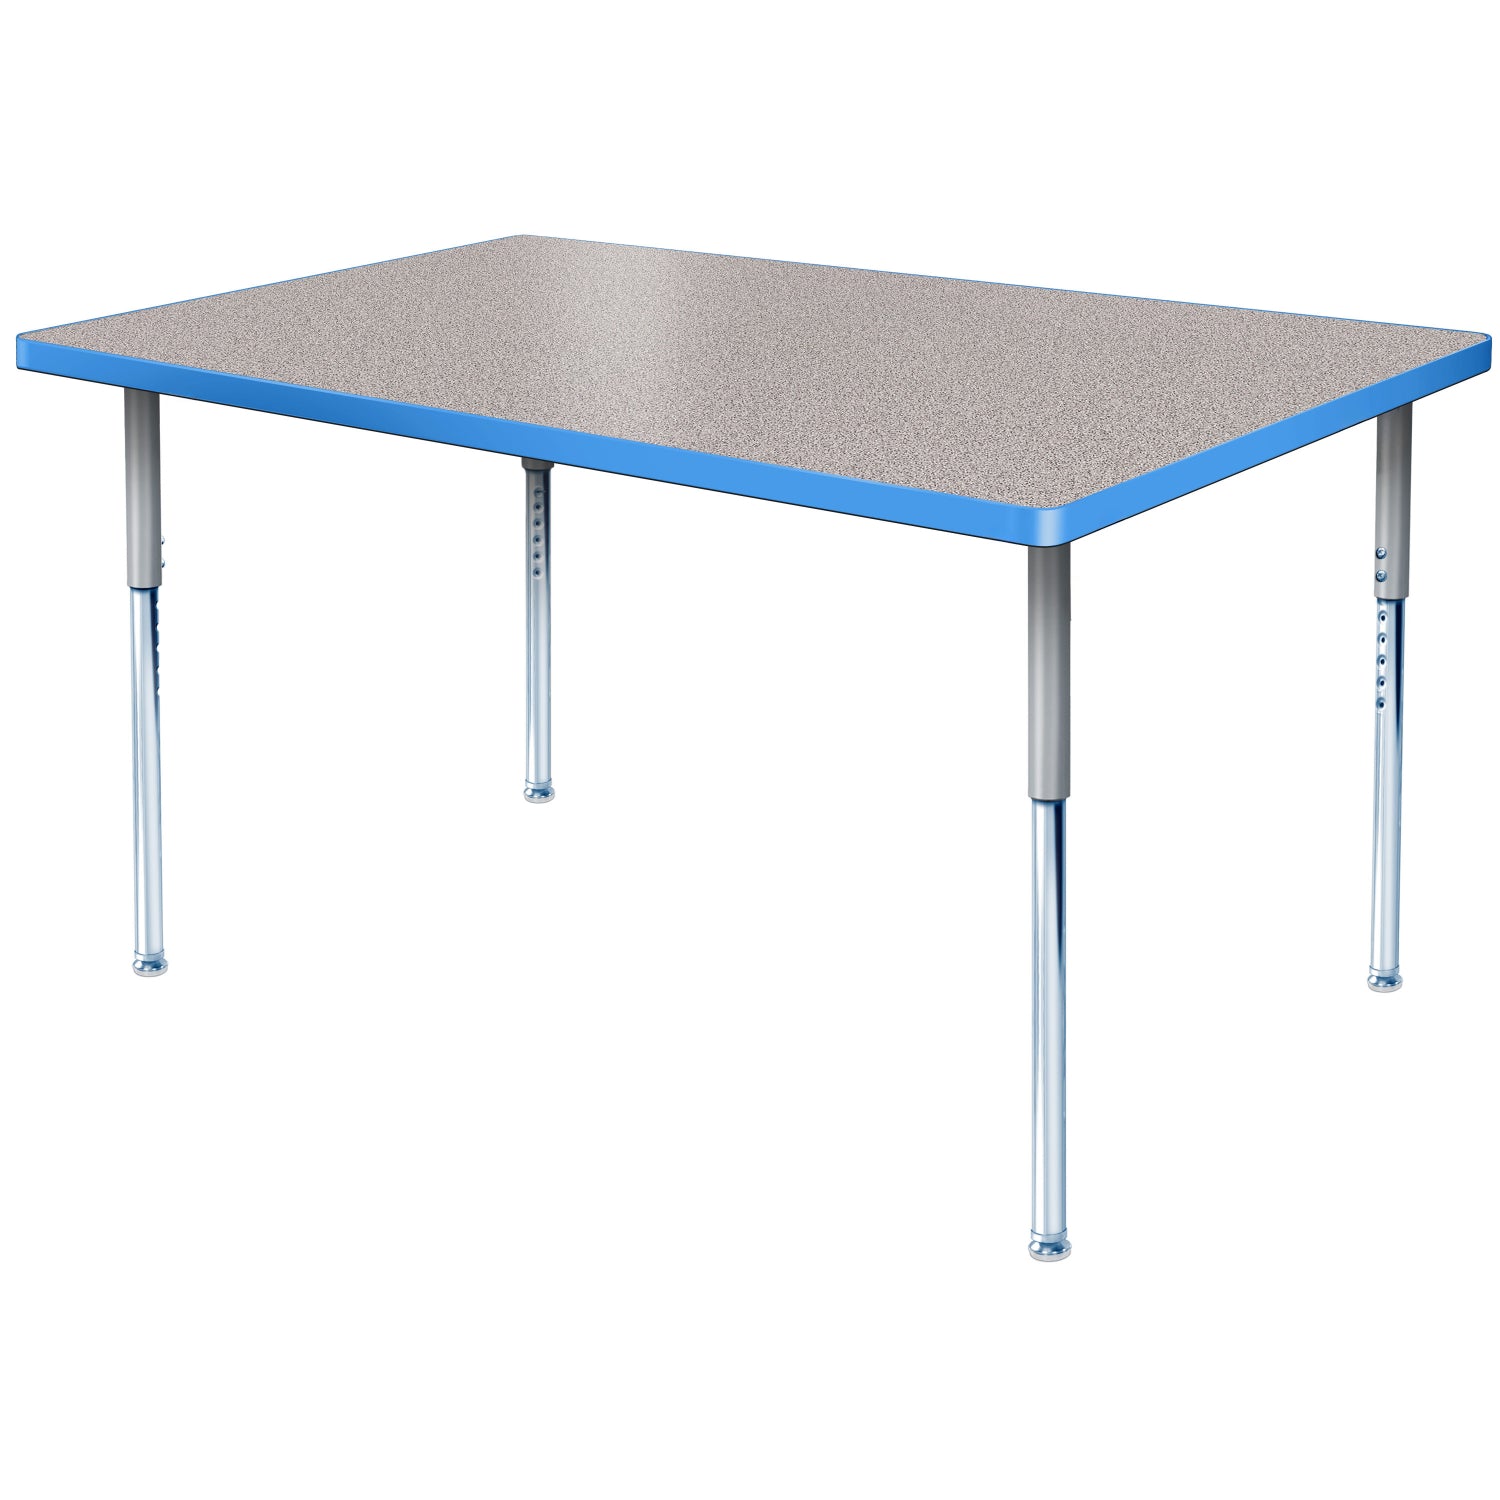 Modern Classic Series 36 x 60" Rectangular Activity Table with High Pressure Laminate Top, Adjustable Height Legs